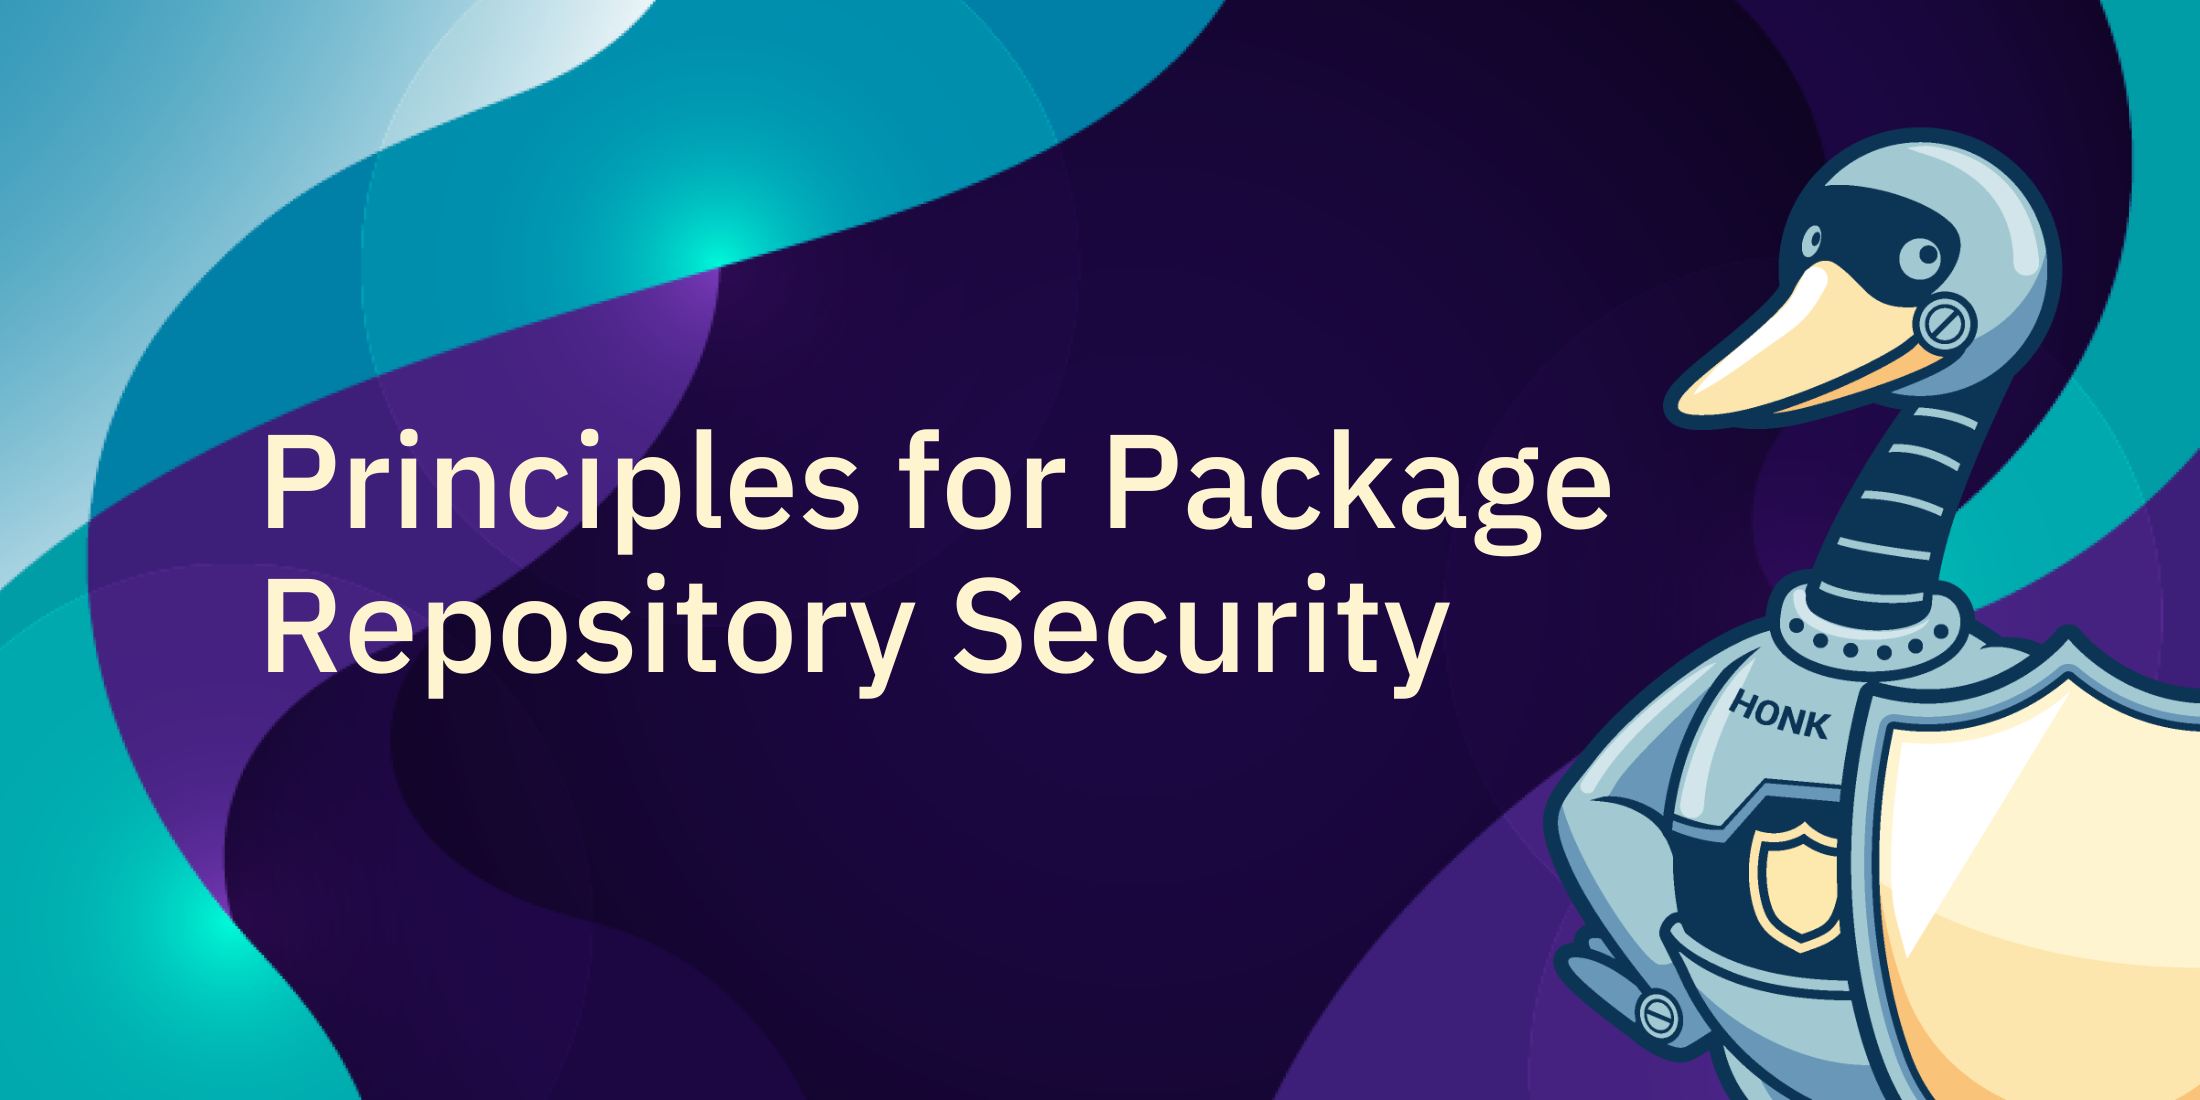 Principles for Package Repository Security